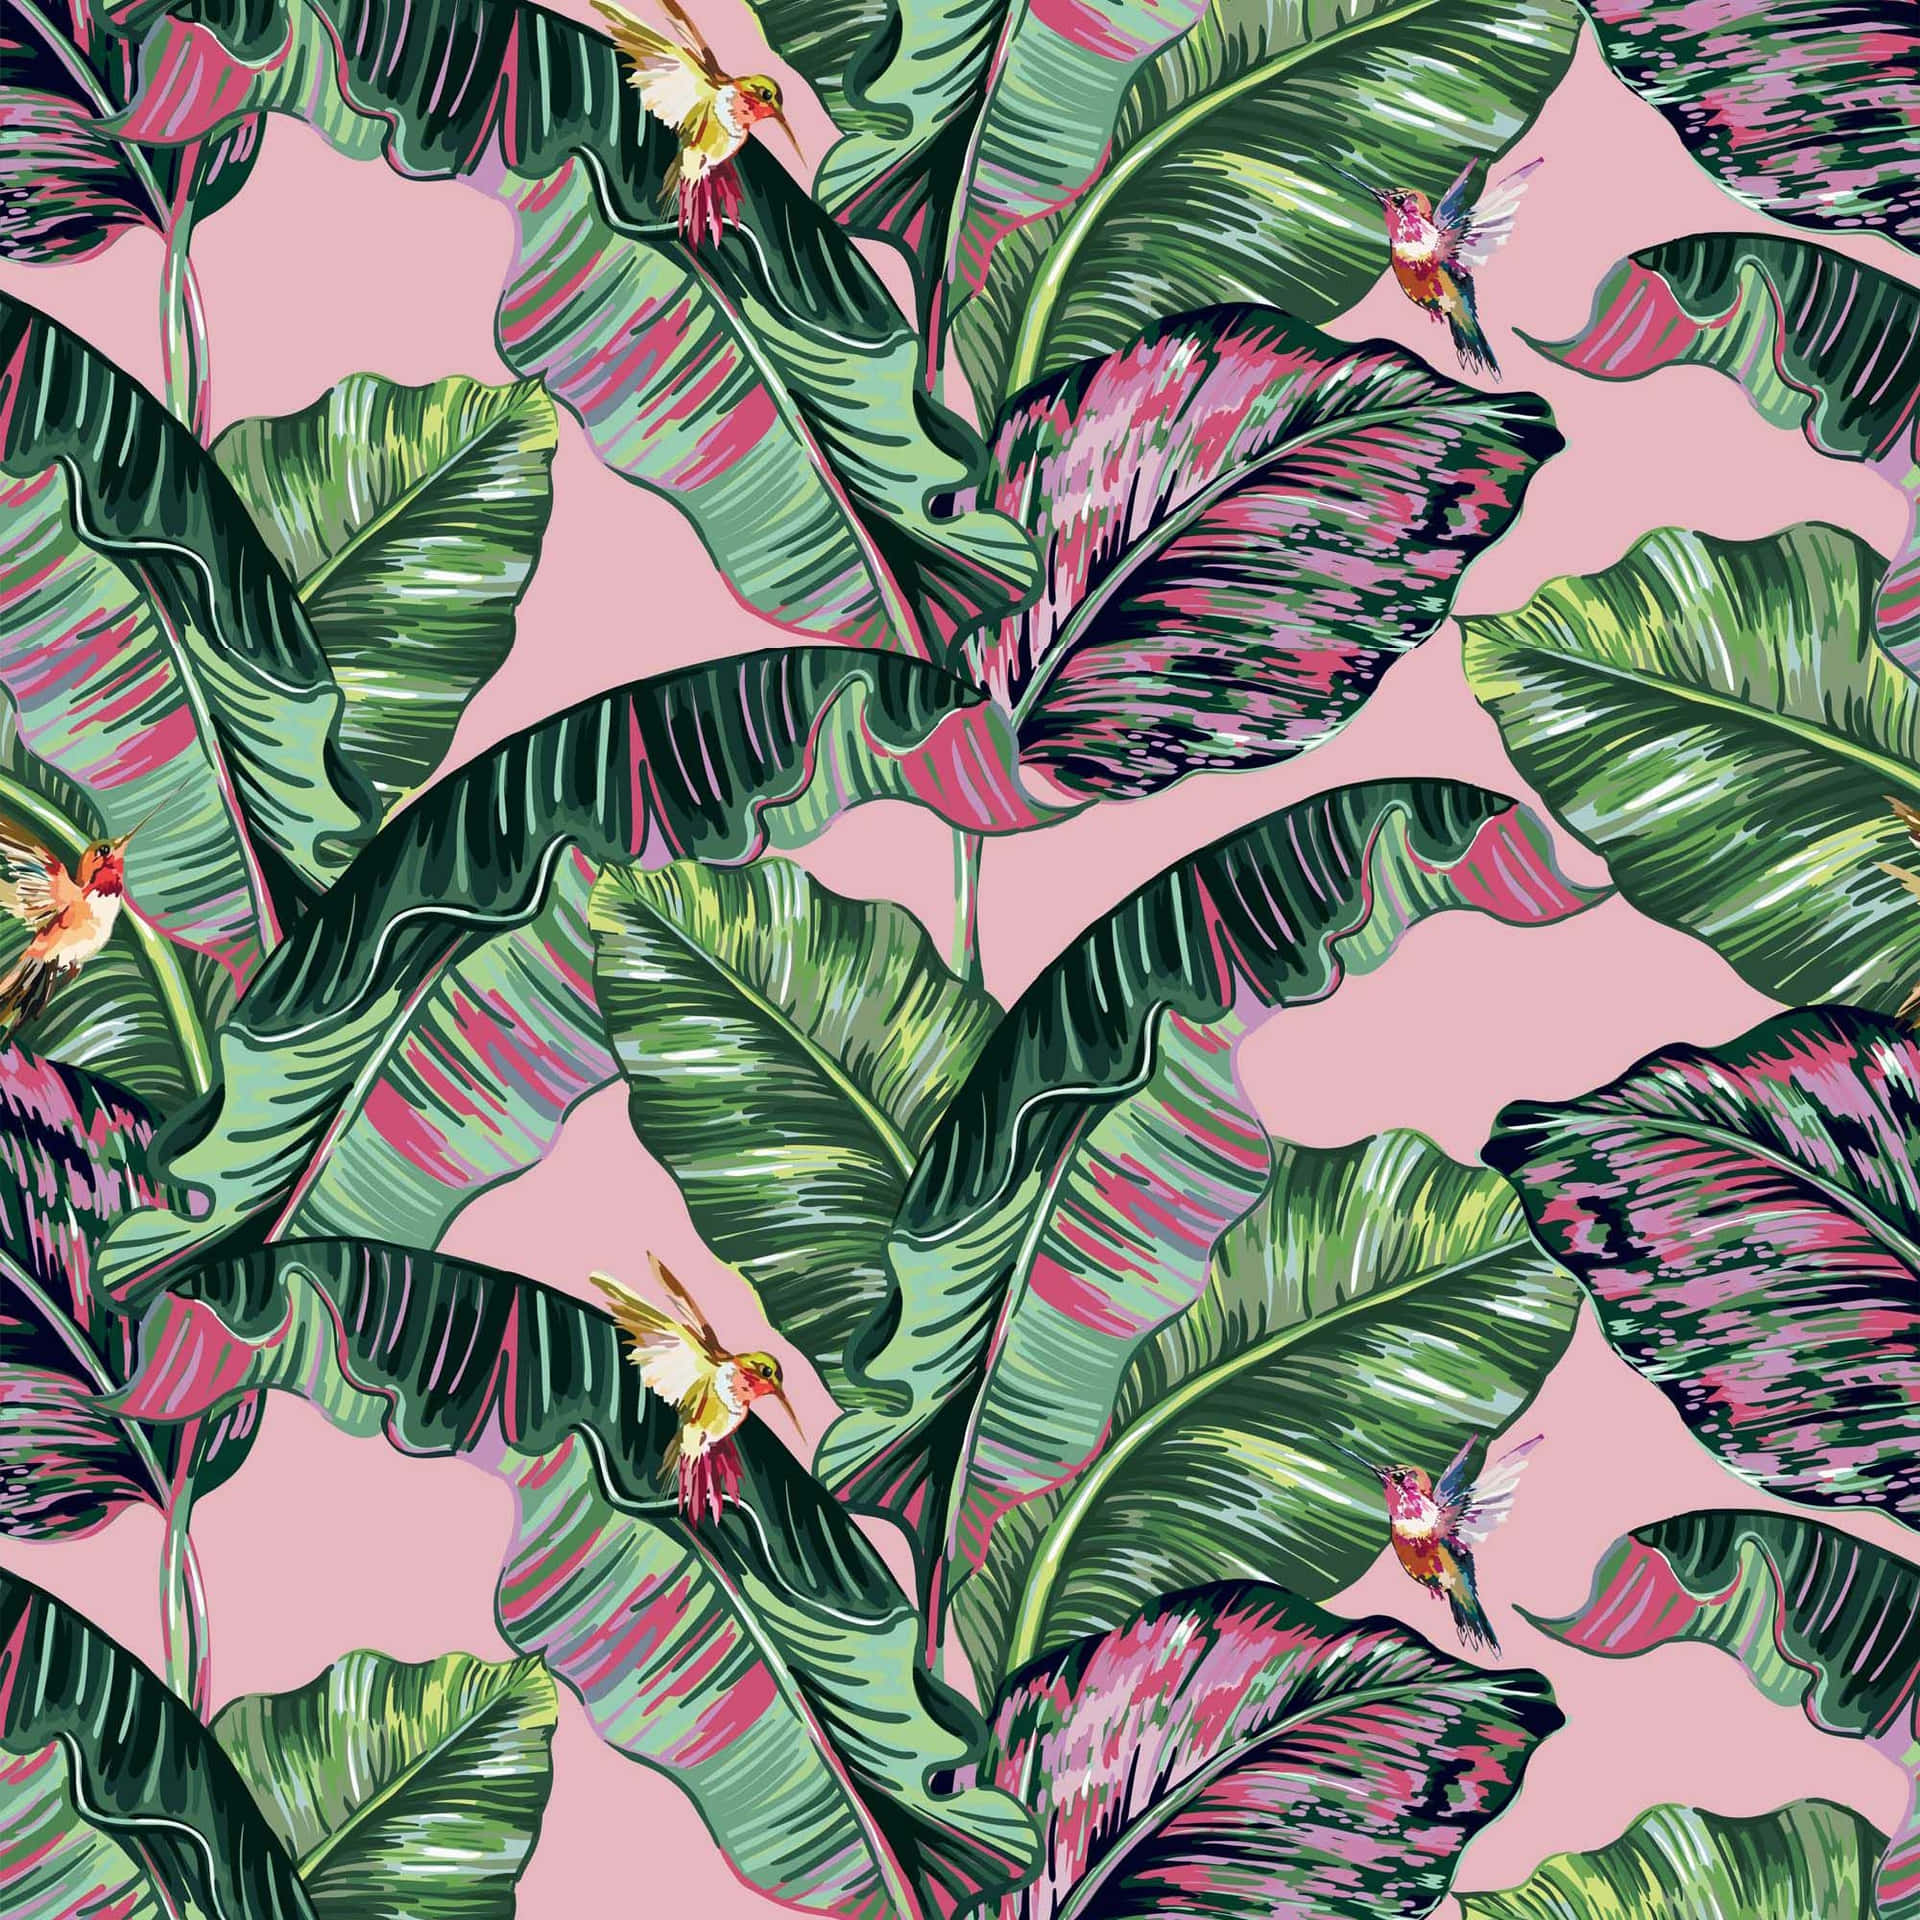 pink and green backgrounds